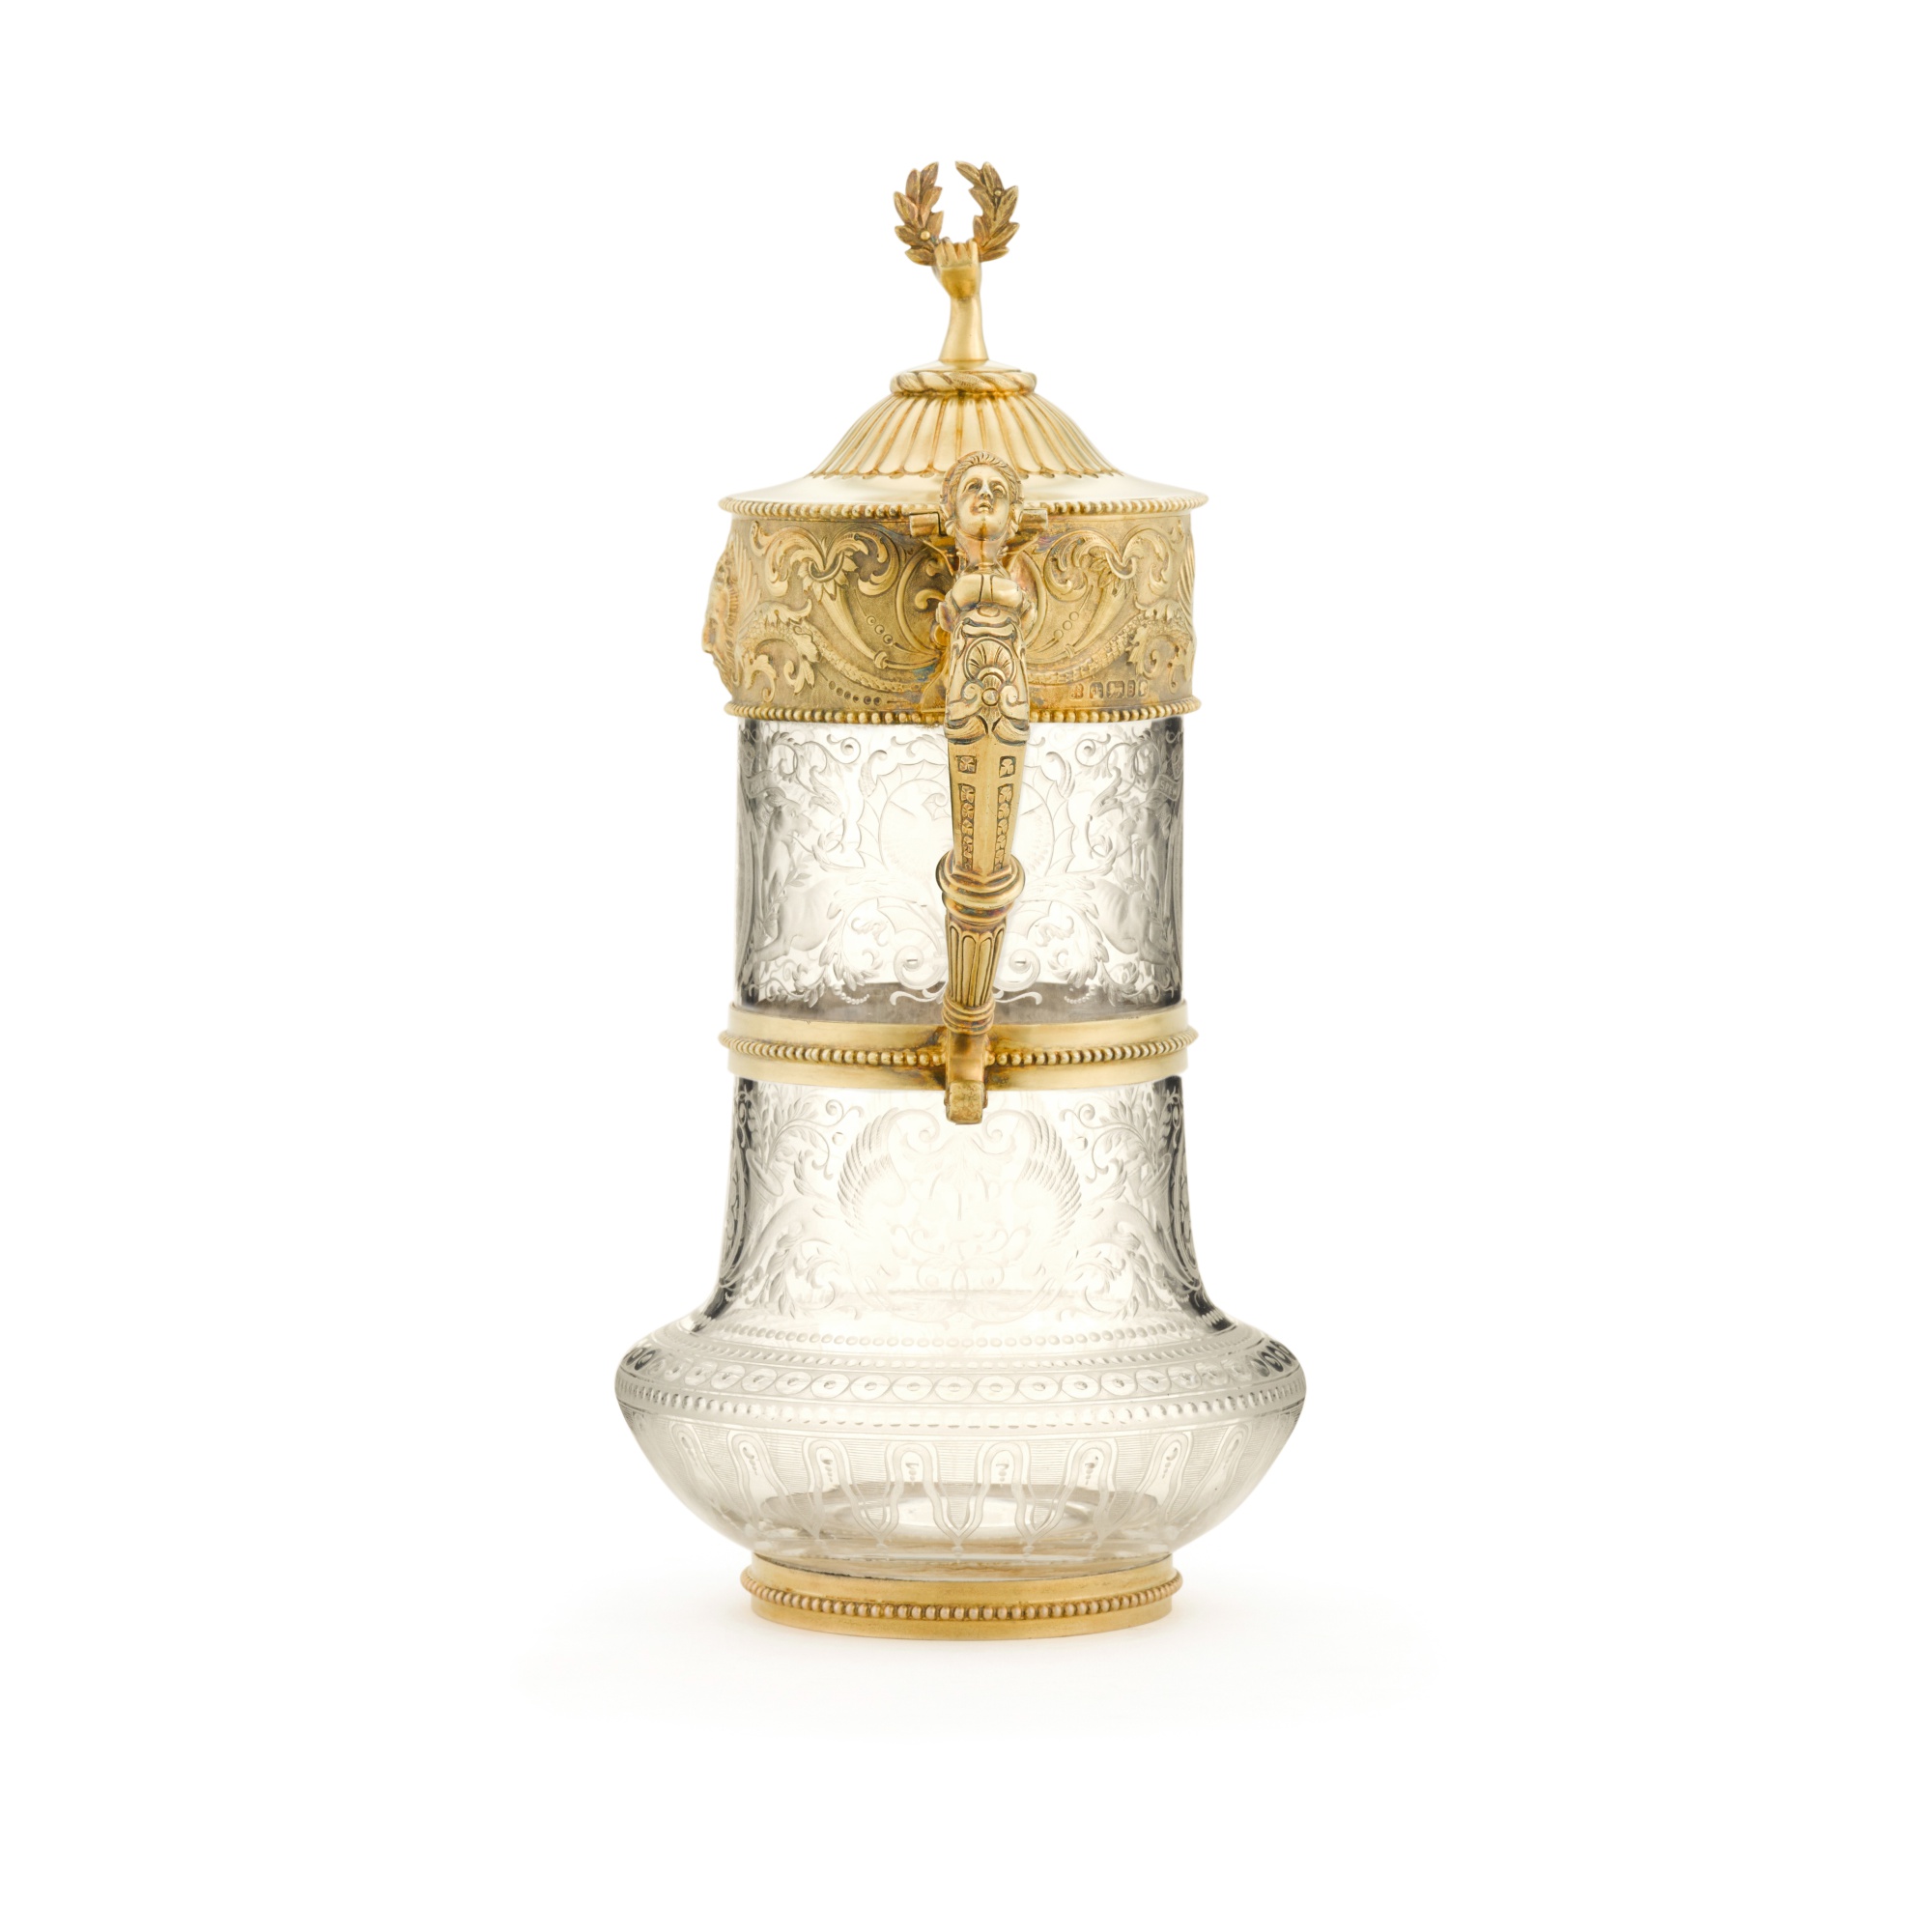 A Victorian silver-gilt-mounted glass claret jug, William & George Sissons, Sheffield, 1869 - Image 3 of 5